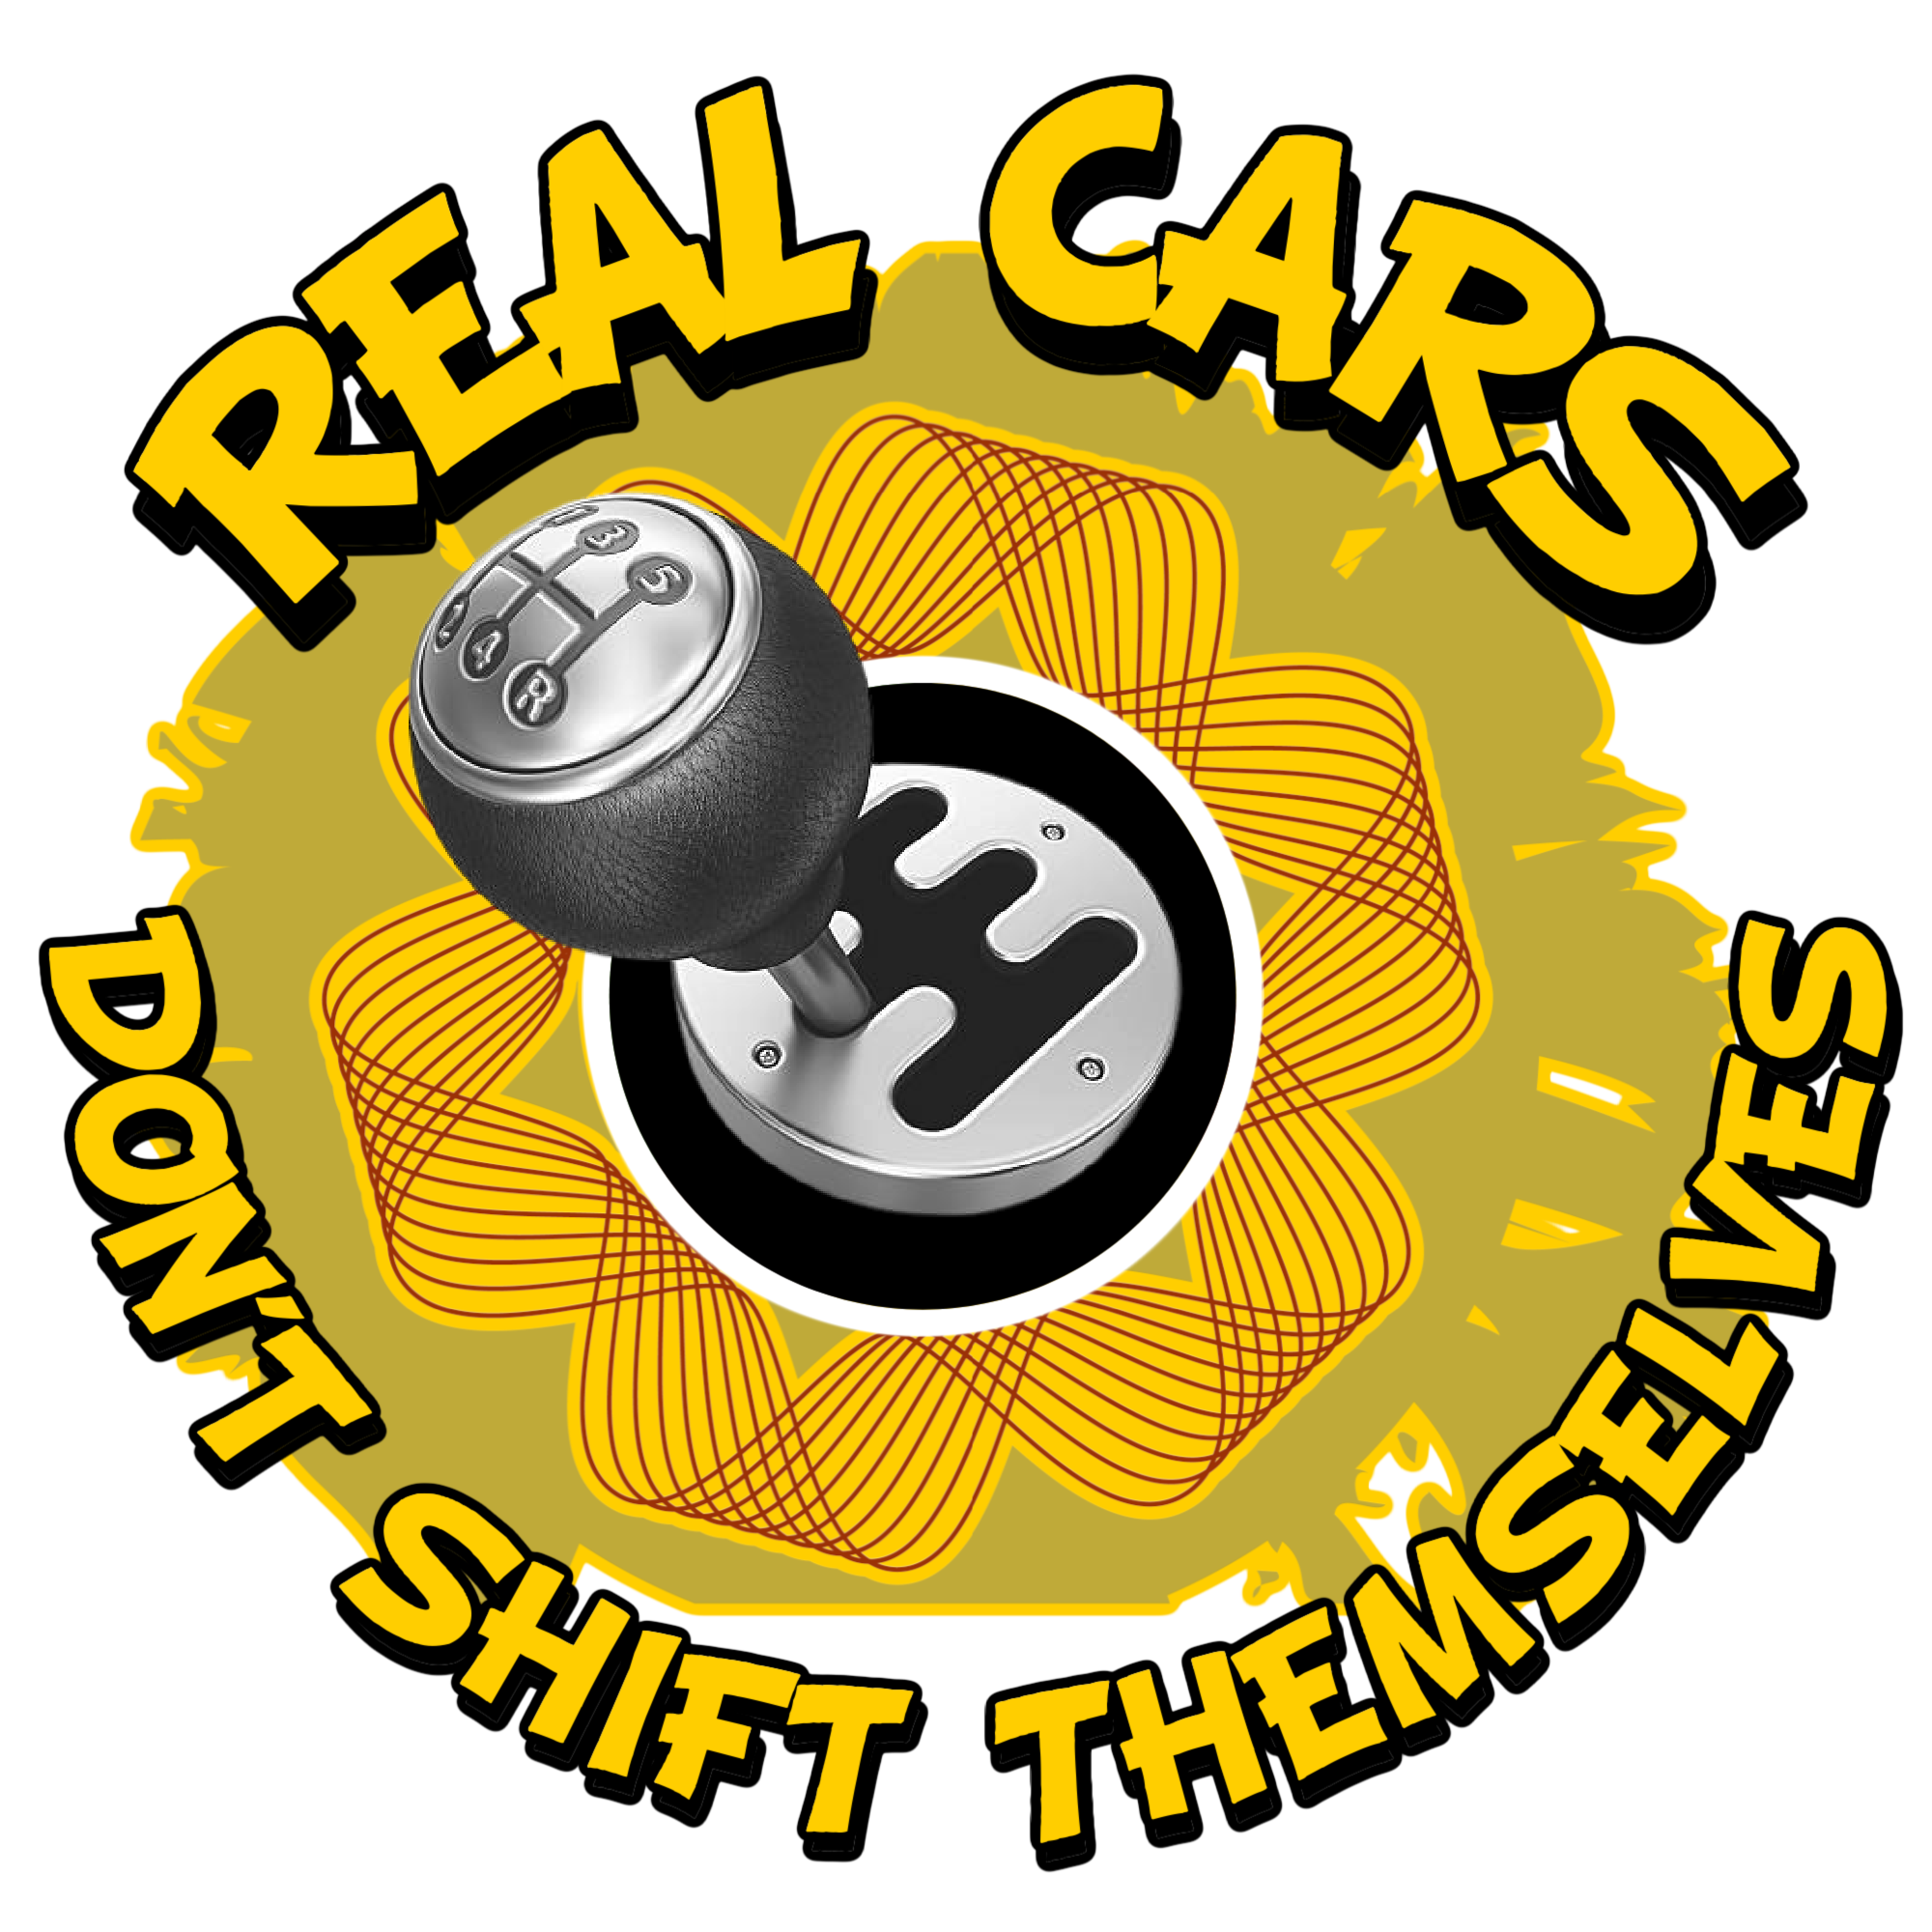 Real Cars Don't Shift Themselves - Image